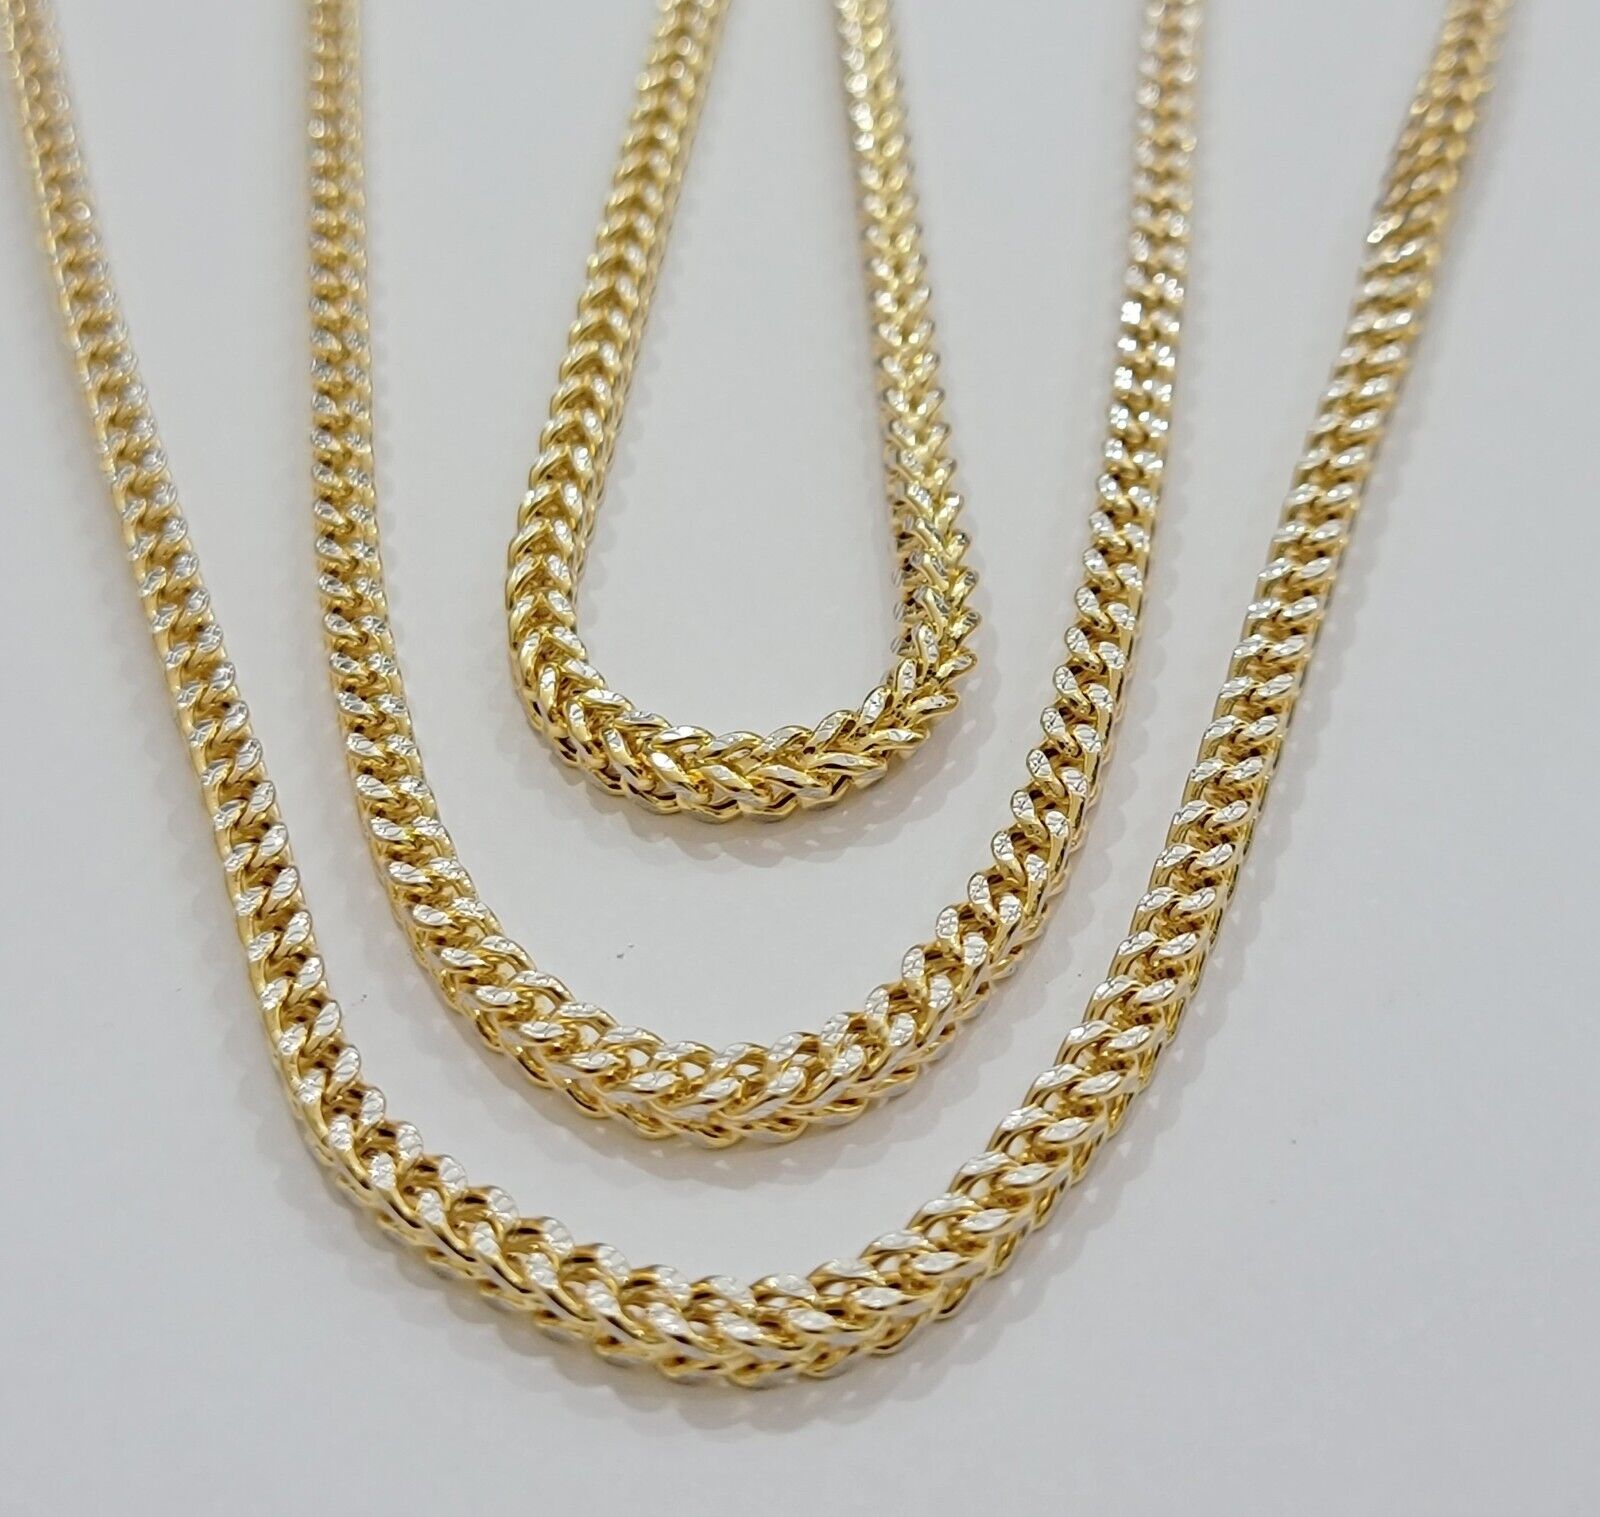 Real 14k Gold Chain Franco Necklace Diamond cuts 3.5mm 18"-24" 14kt Yellow Gold